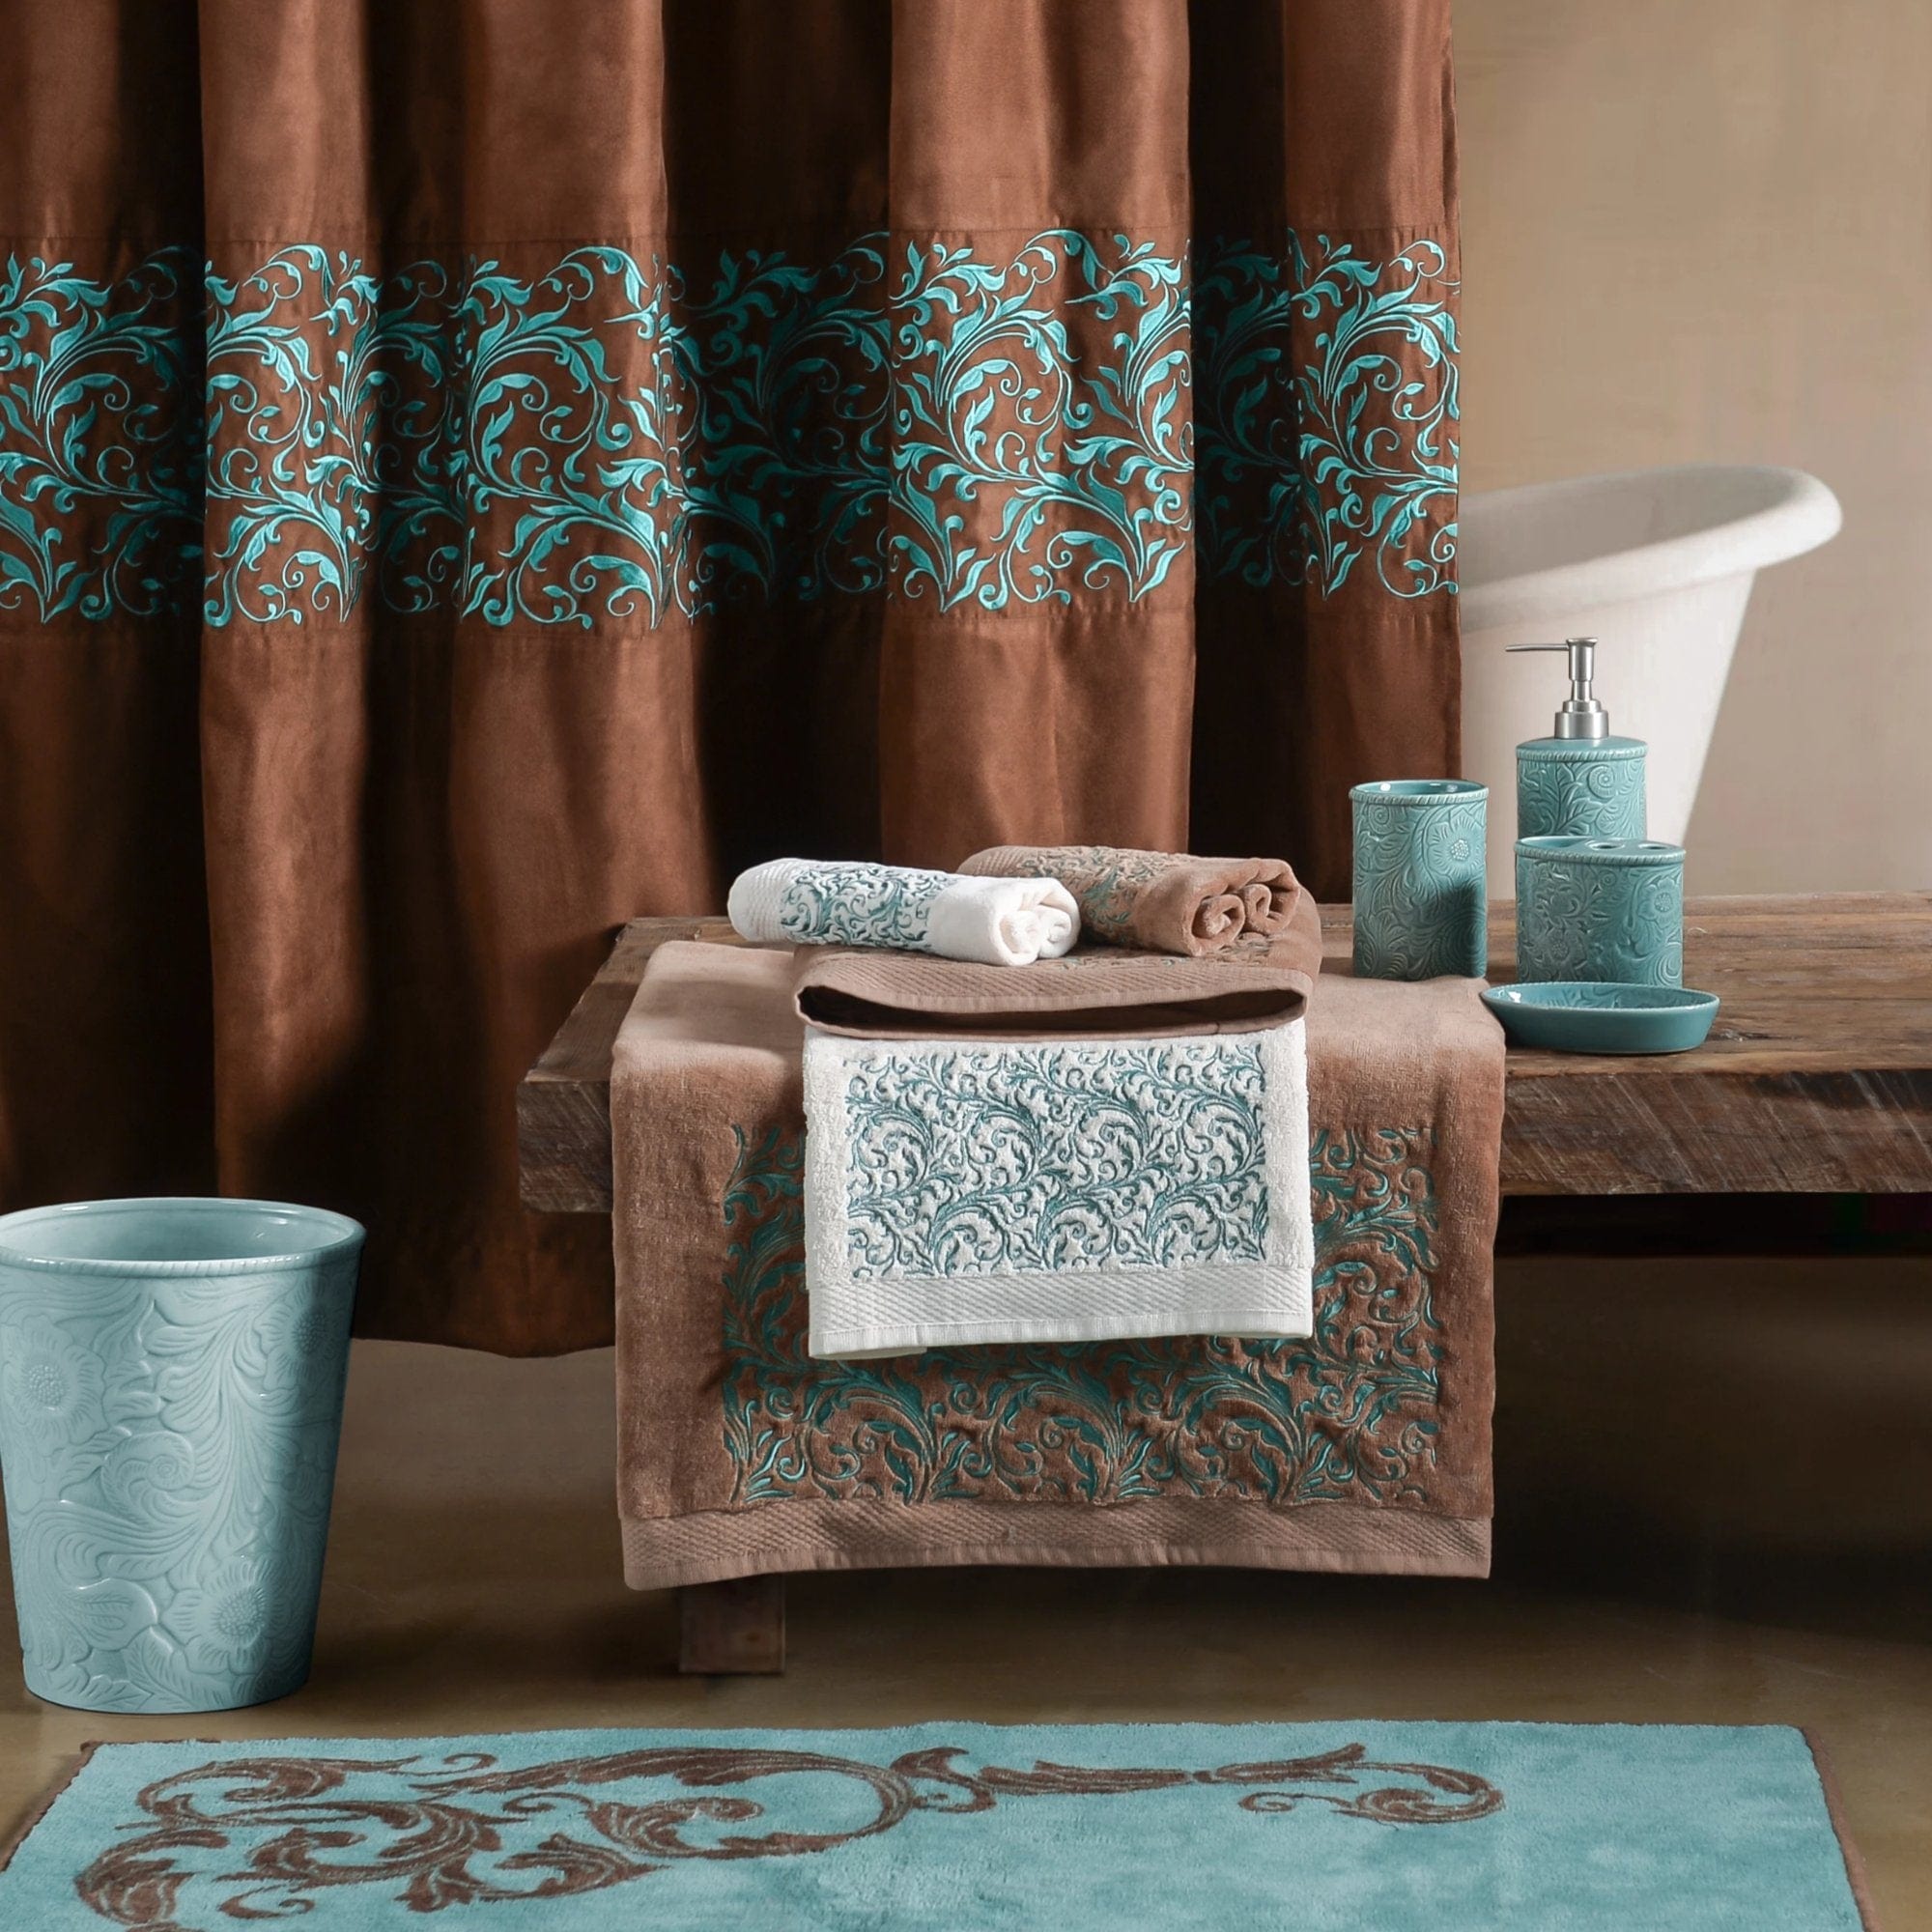 http://www.hiendaccents.com/cdn/shop/products/hiend-accents-complete-bathroom-sets-wyatt-complete-9-pc-bathroom-set-lf1762-wyatt-complete-9-pc-bathroom-set-scrollwork-brown-cream-turquoise-13828780392551.jpg?v=1662637317